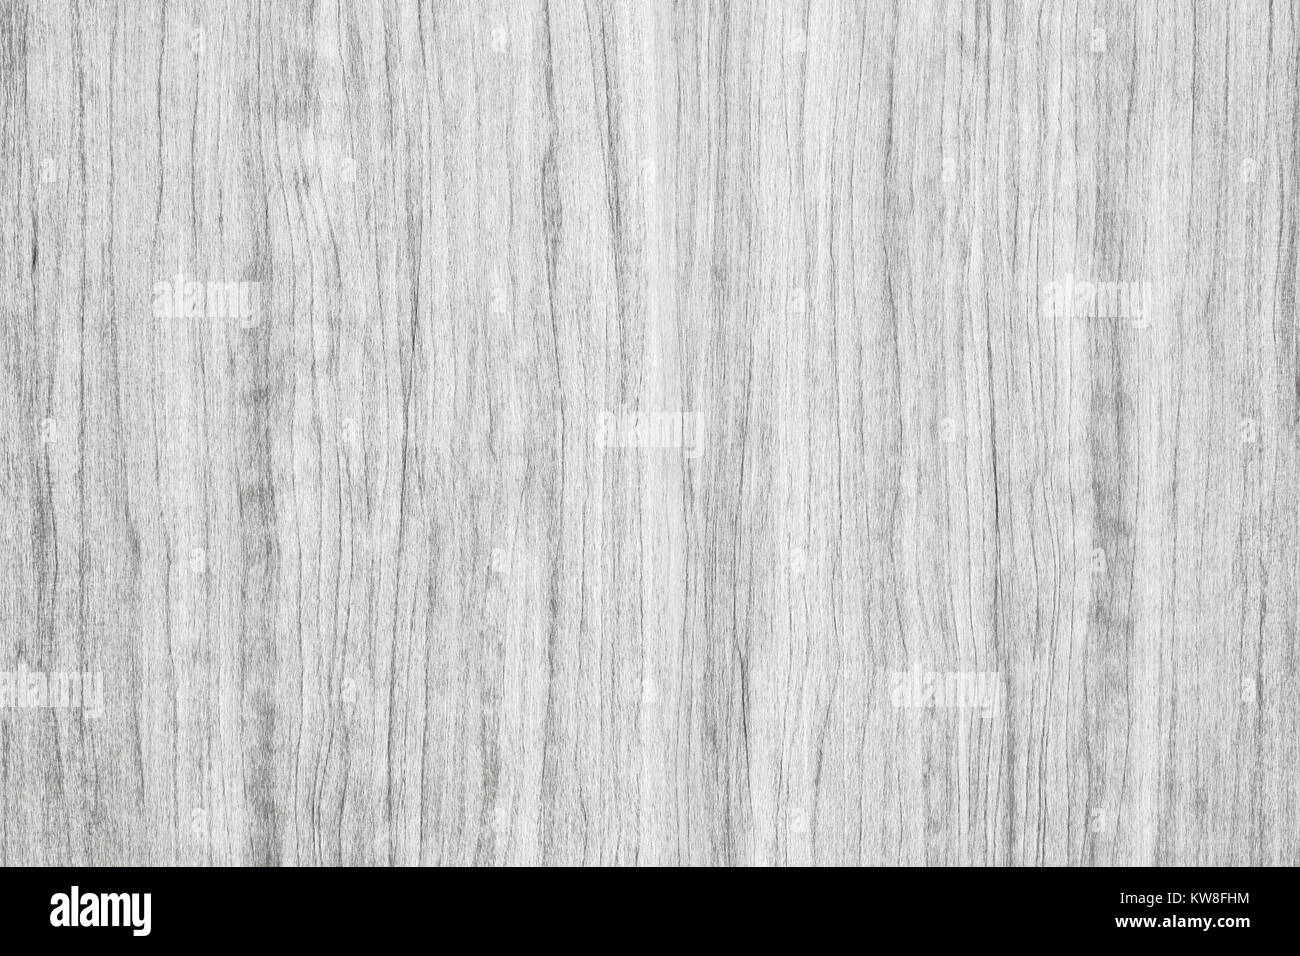 White washed grunge wooden texture to use as background. Wood texture with natural pattern Stock Photo